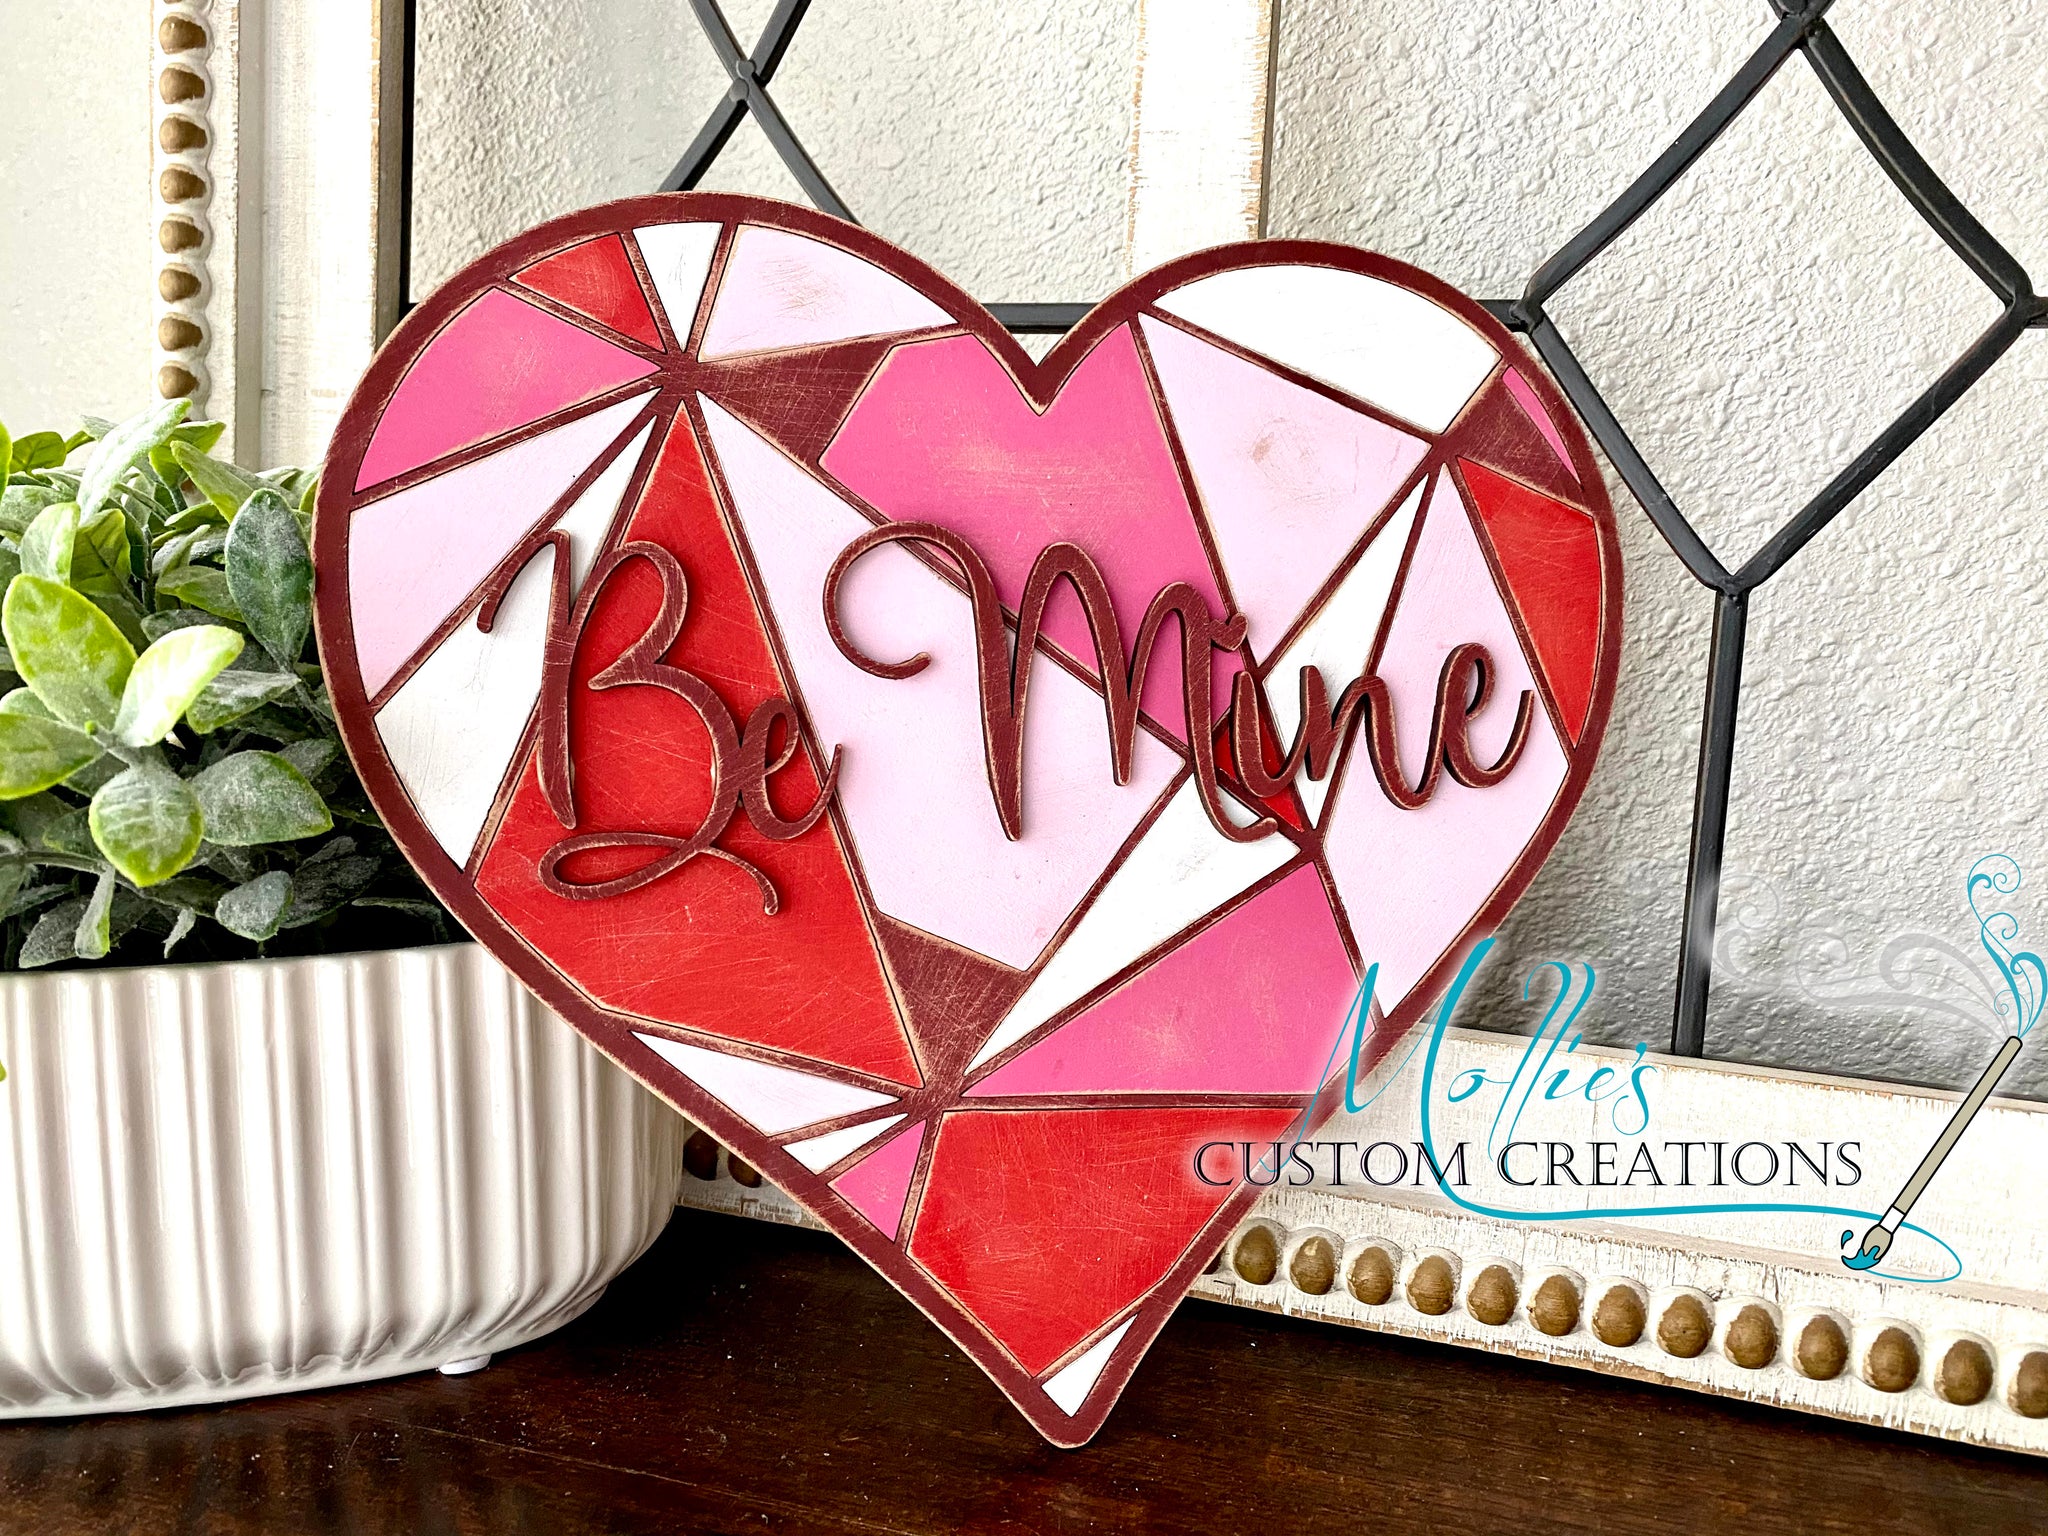  Handmade Wooden Heart Ornaments, Valentine's day Wood Decor,  Hand Carved Wooden Hearts 3d Painted Red Heart (Simple, red) : Handmade  Products